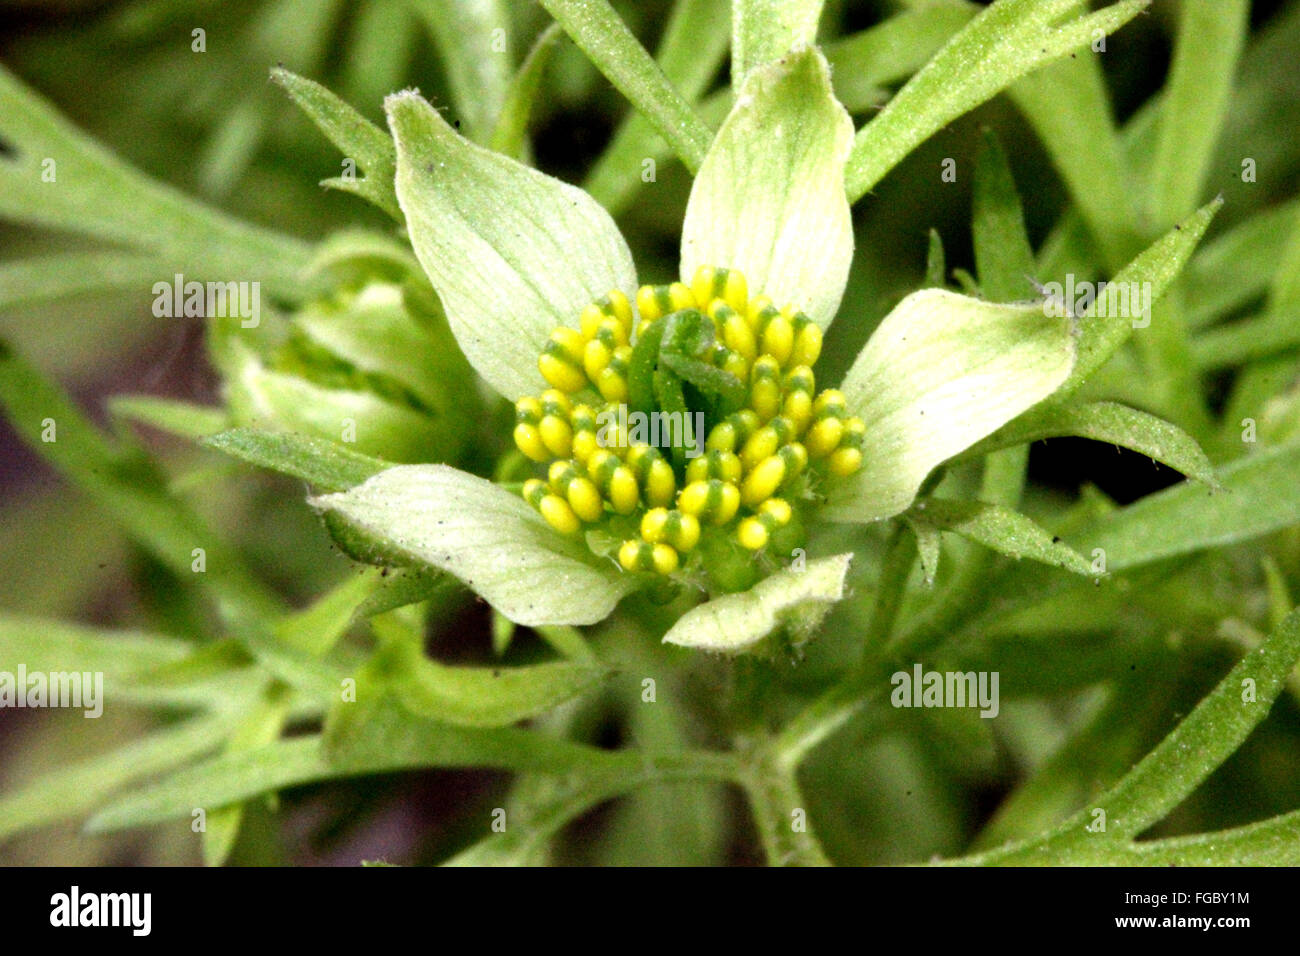 Nigella sativa, black caraway, cultivated annual herb with finely divided leaves and pale white flowers, capsule, black seeds Stock Photo